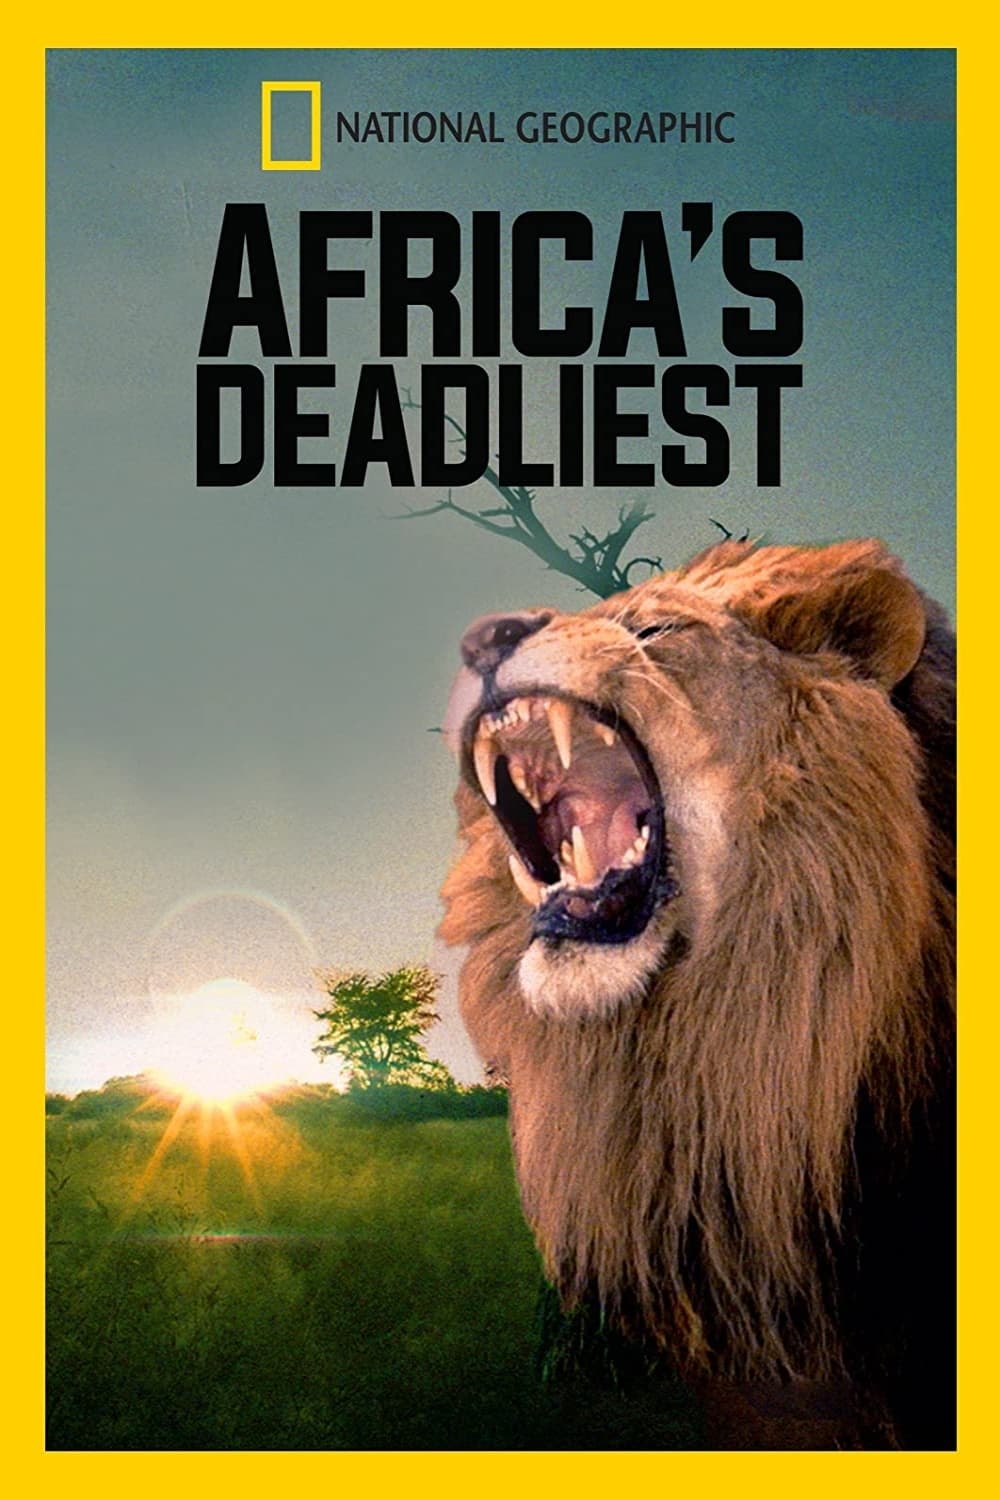 Africa's Deadly Kingdoms